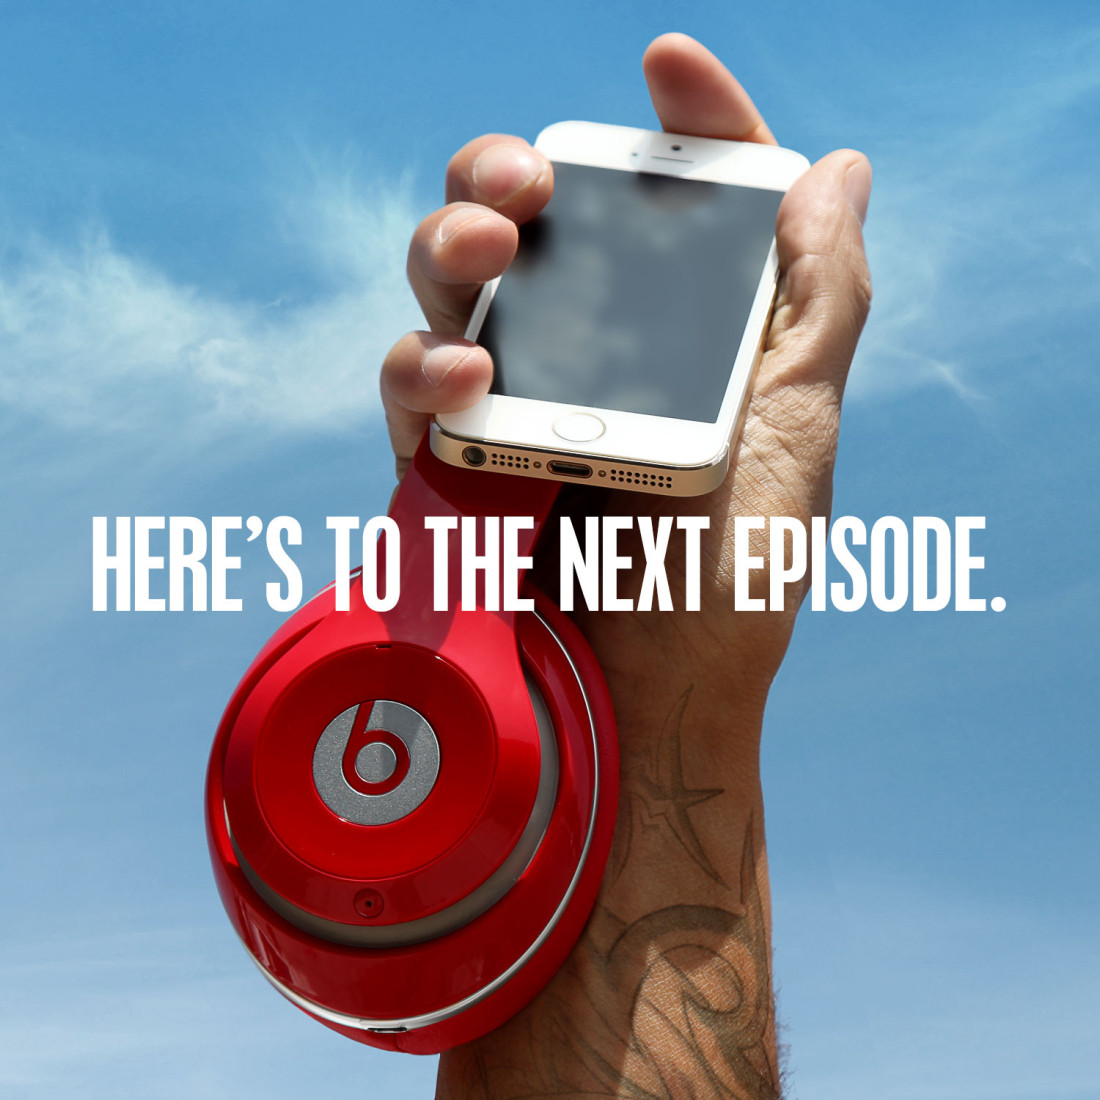 Beats acquired by Apple